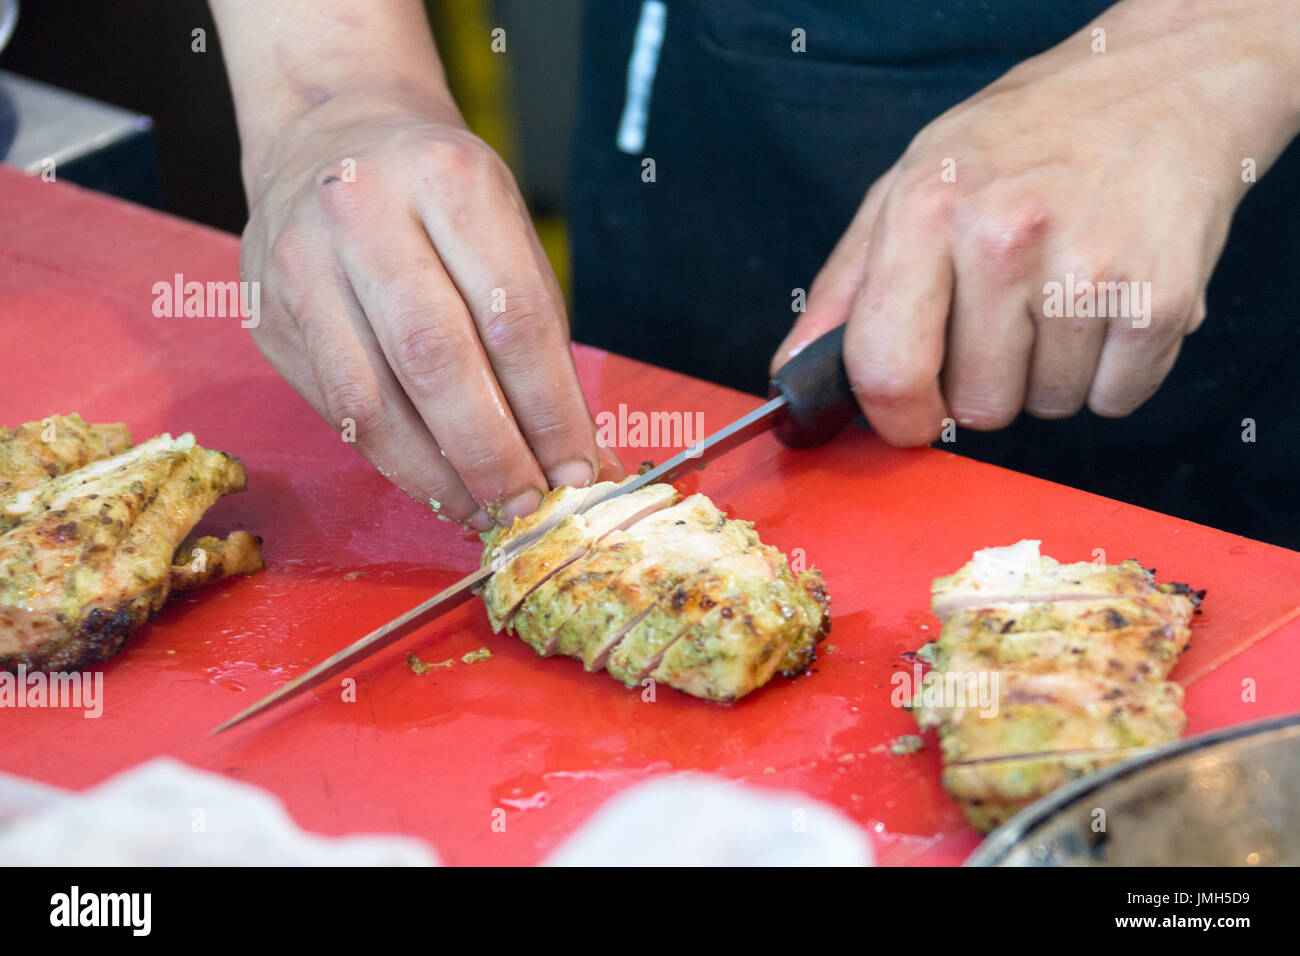 Slicing chicken at The Pot Luck Club, Cape Town, South Africa Stock Photo